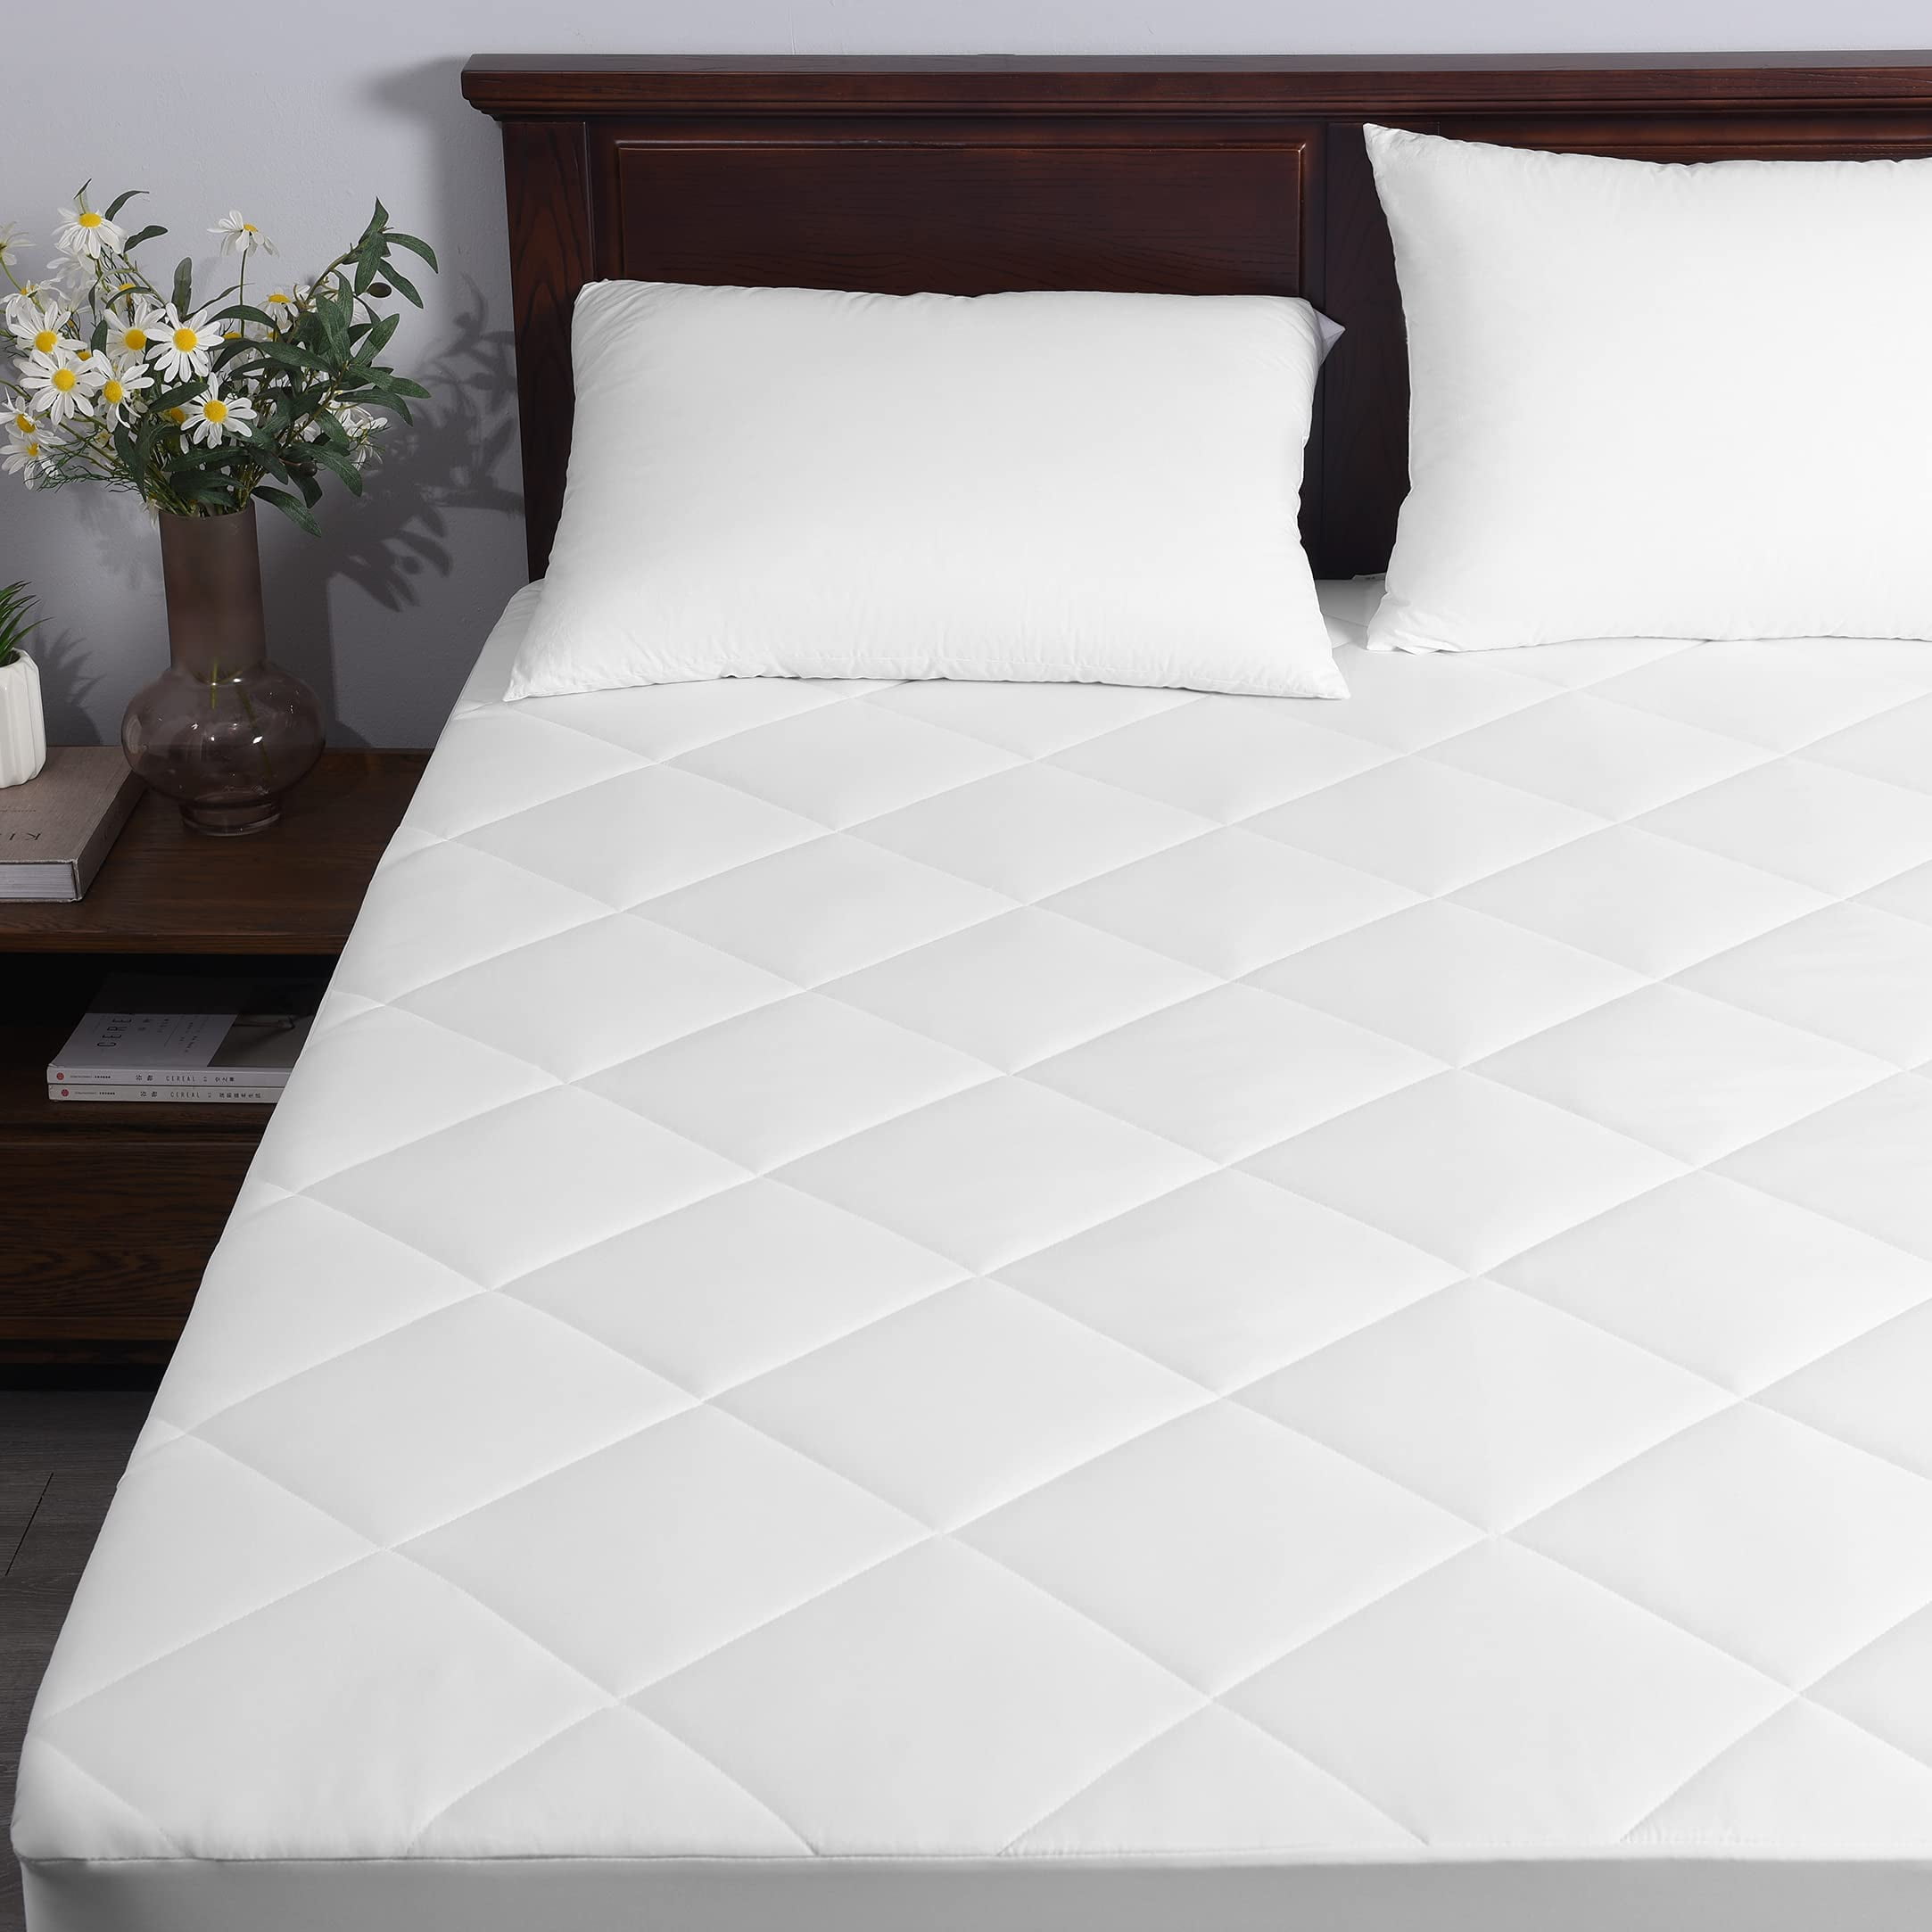 Quilted Fitted Hypoallergenic Mattress Pad Cover Protector Deep Pocket Six Sizes 